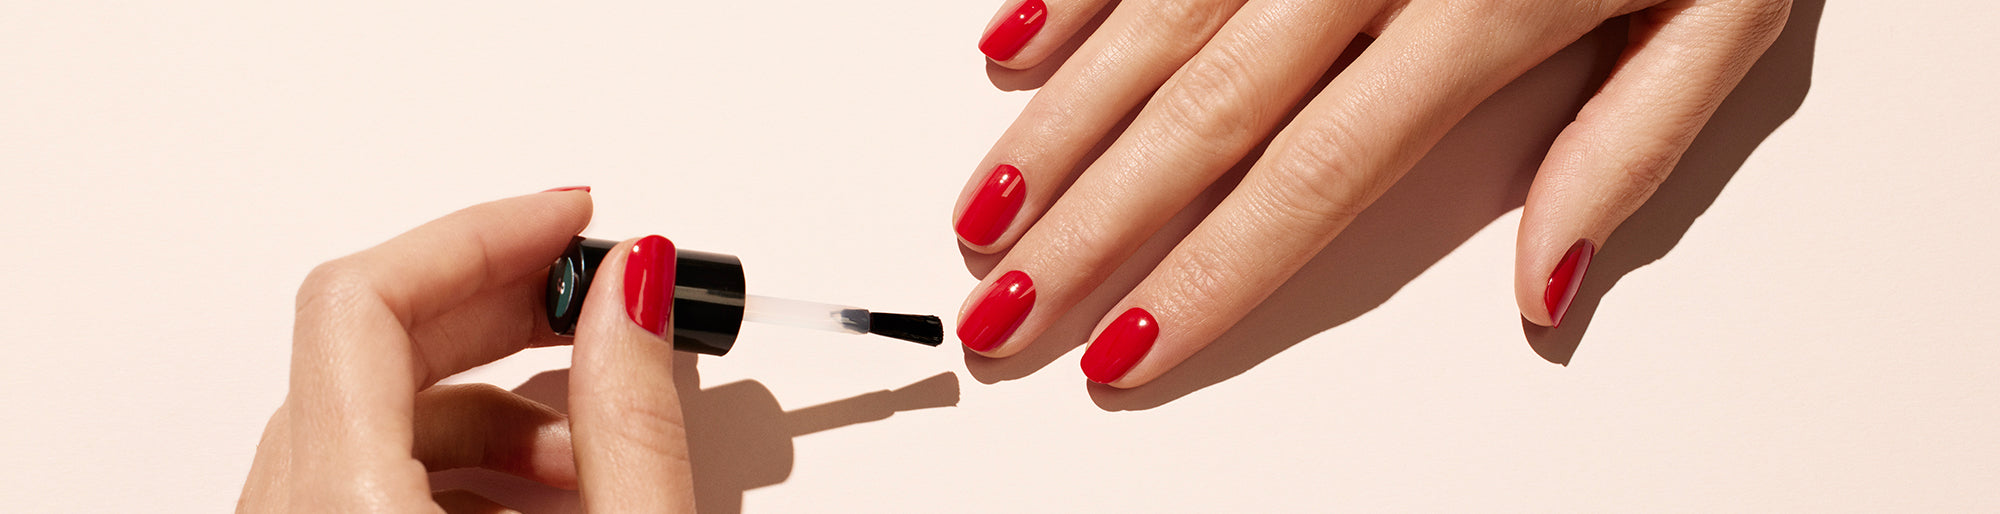 How_to_Apply_and_Remove_Nail_Polish_Like_A_Pro - Nicely Polished